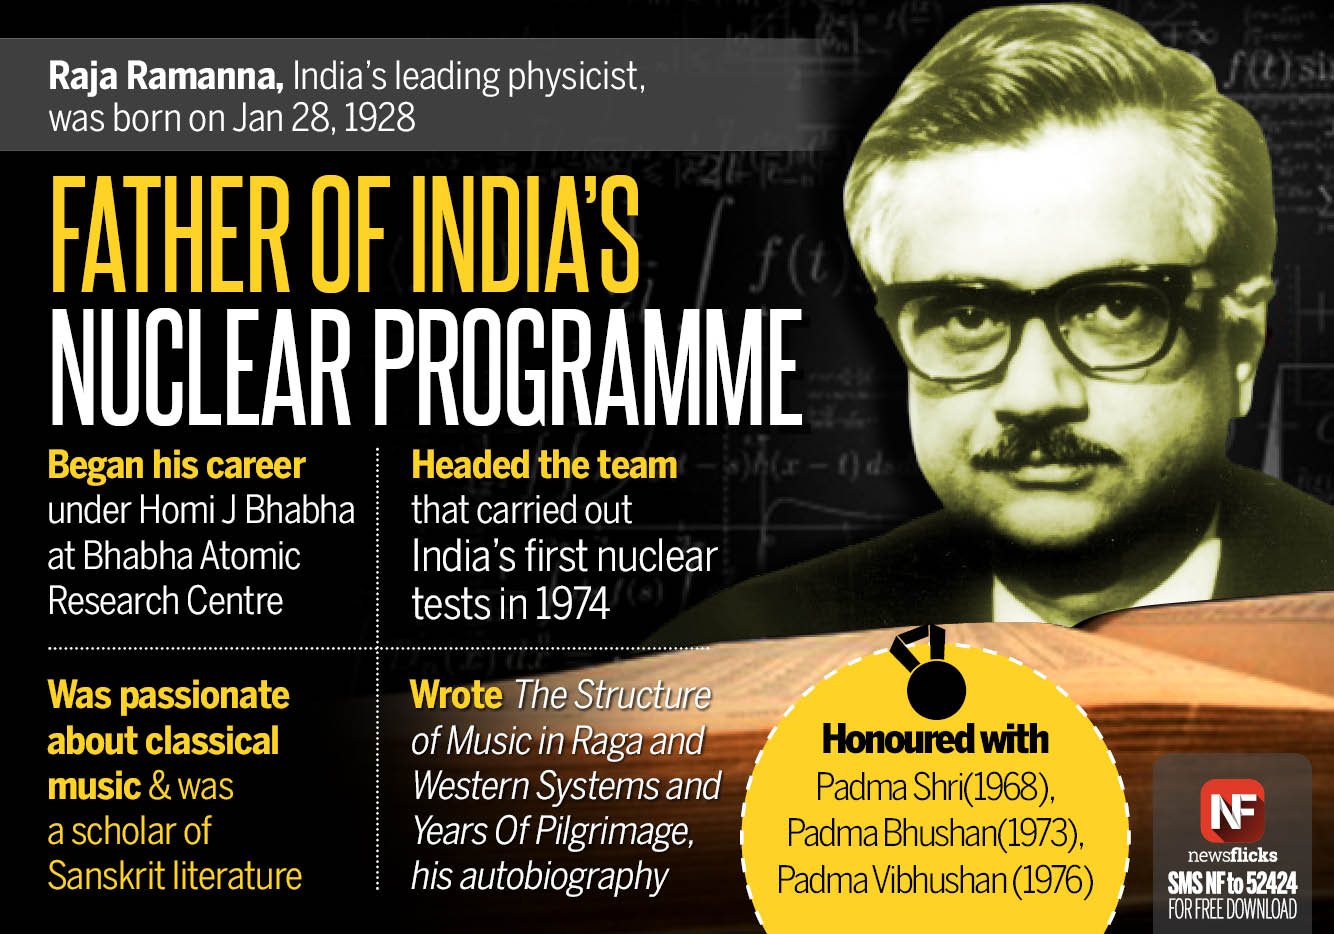 Newsflicks on X: "Physicist Raja Ramanna, who contributed to India's burgeoning nuclear program, was born on Jan 28, 1928 https://t.co/Z2CpX5Z4jm" / X